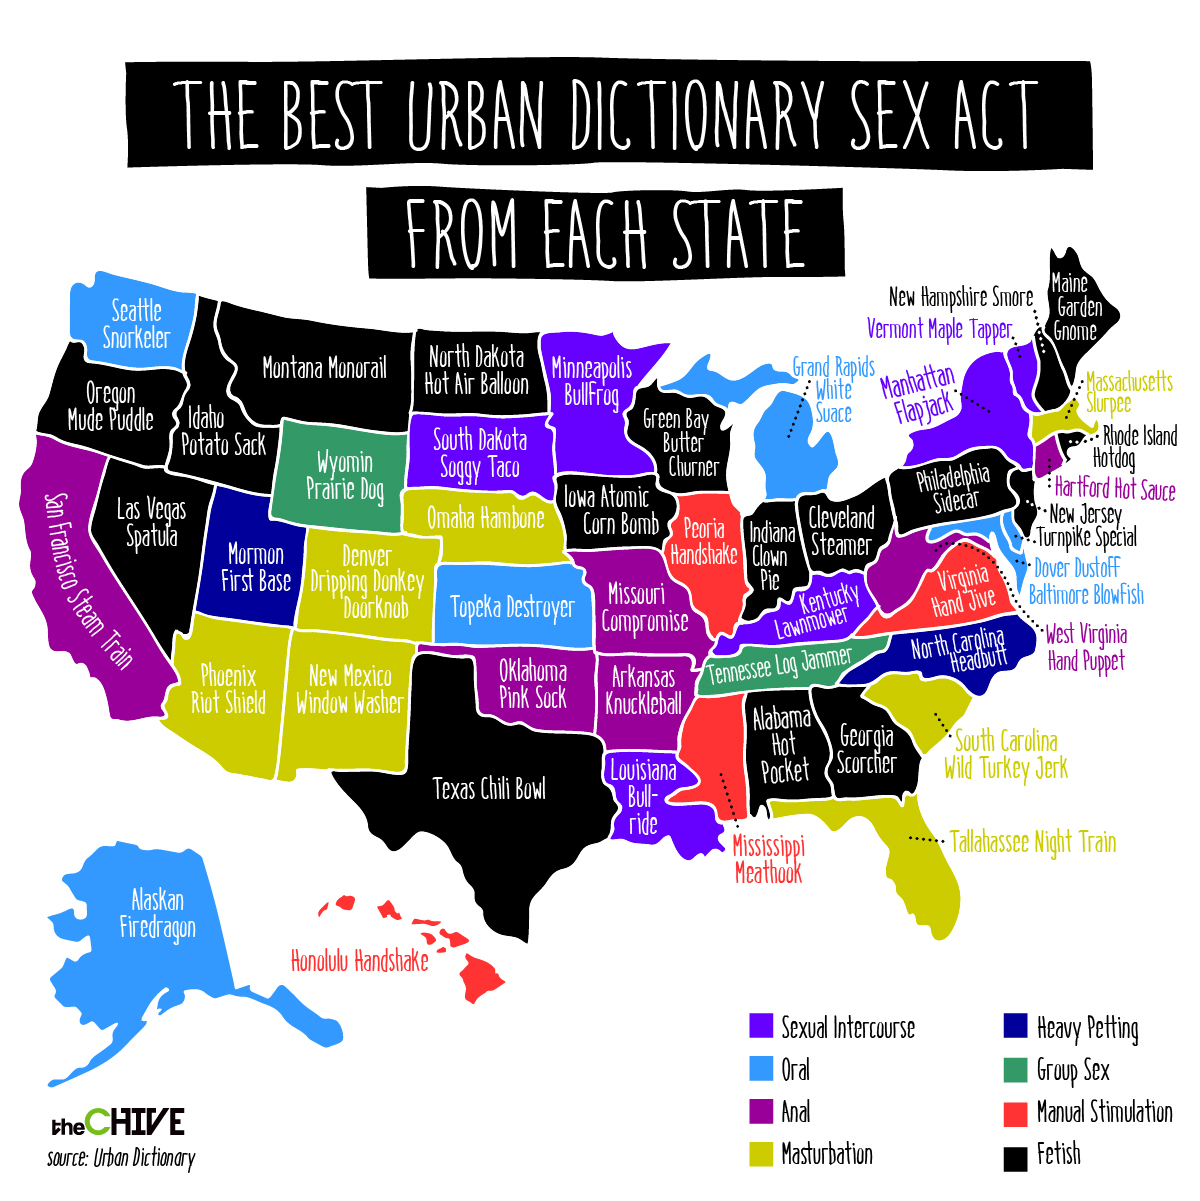 Heres The “Best” Urban Dictionary Sex Act From Each State  foto